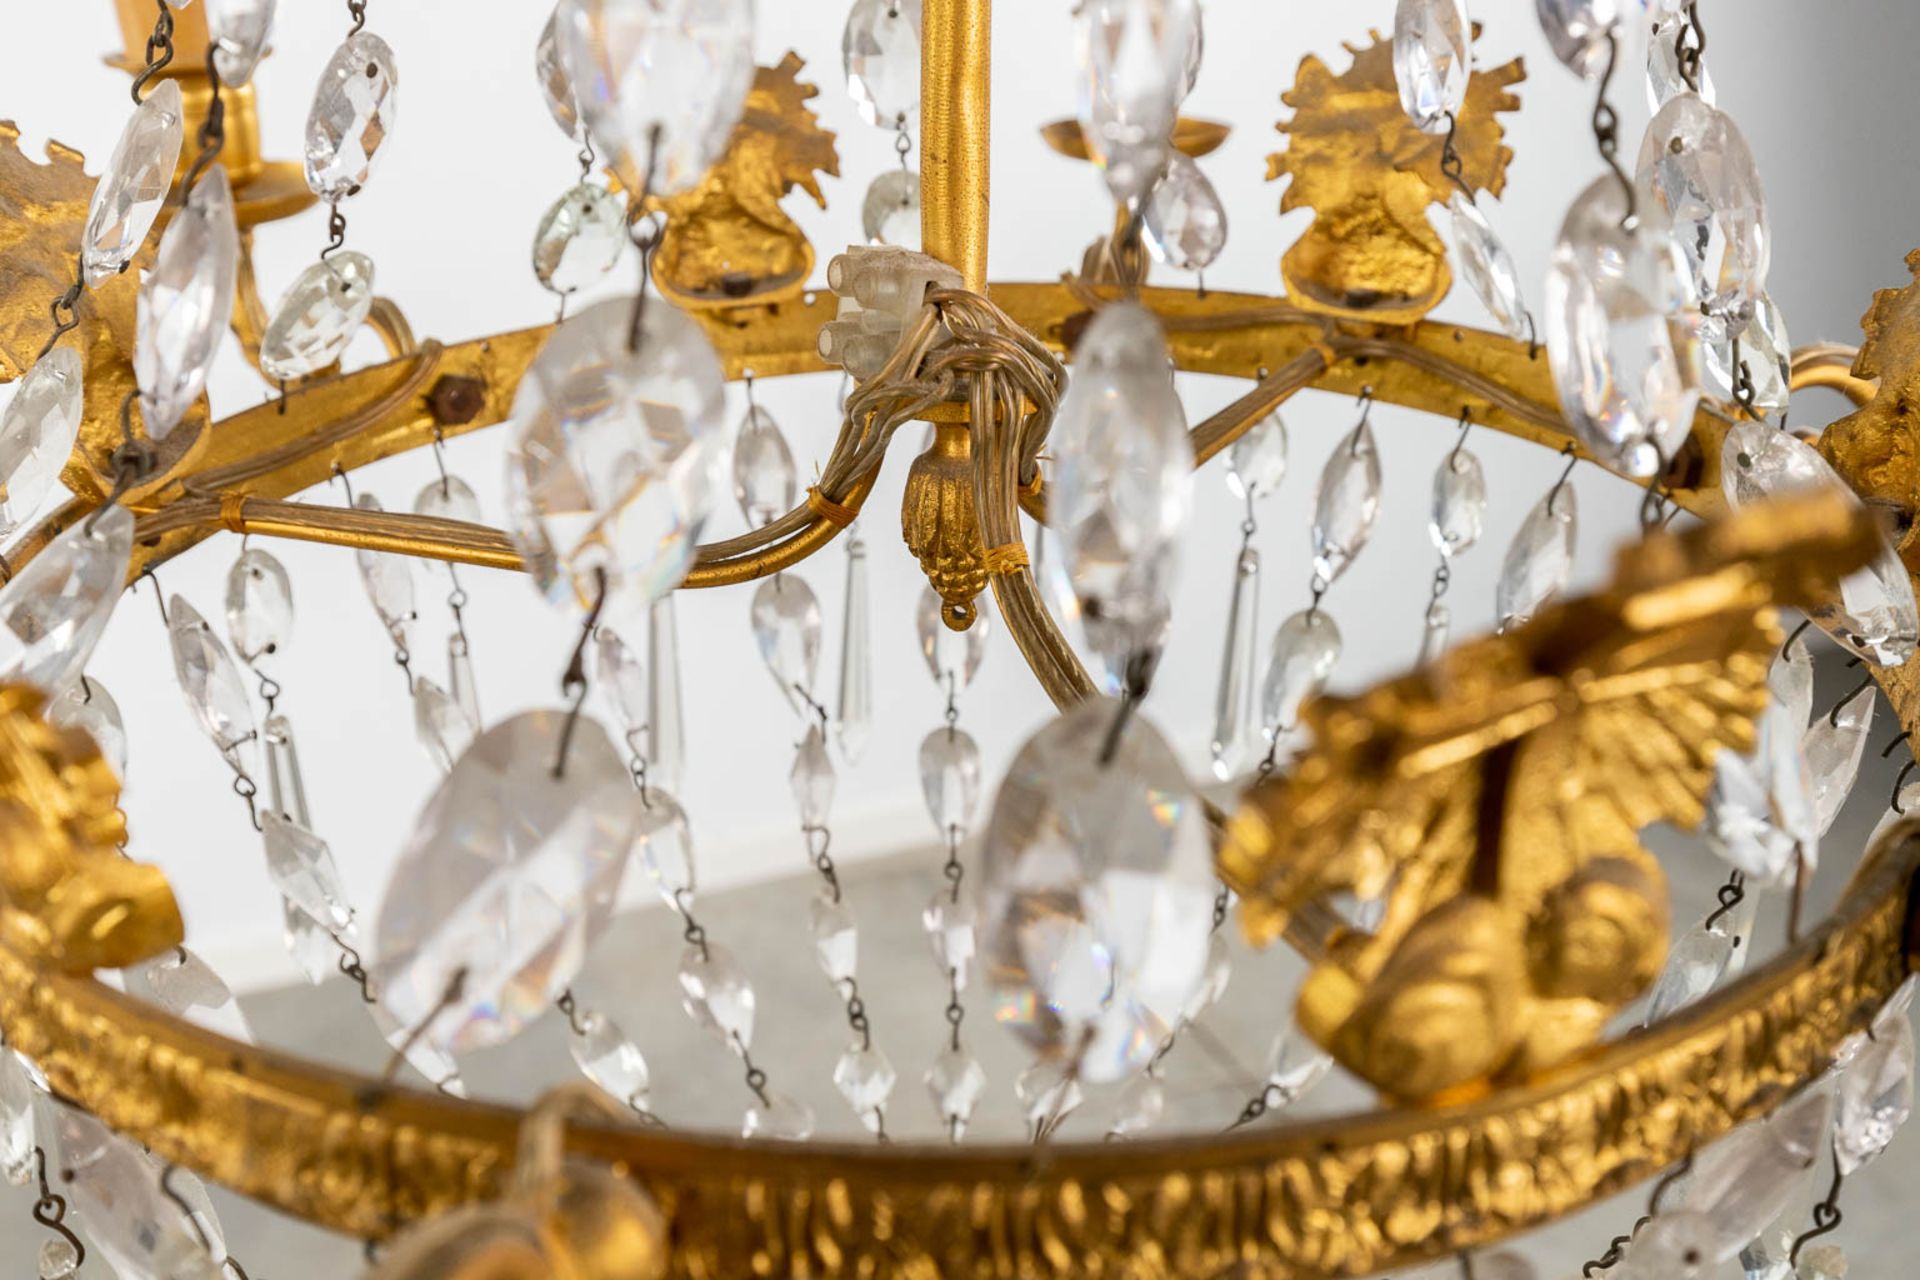 A chandelier 'Sac ˆ Perles', bronze and glass in empire style. 20th C. (H: 100 x D: 50 cm) - Image 8 of 11